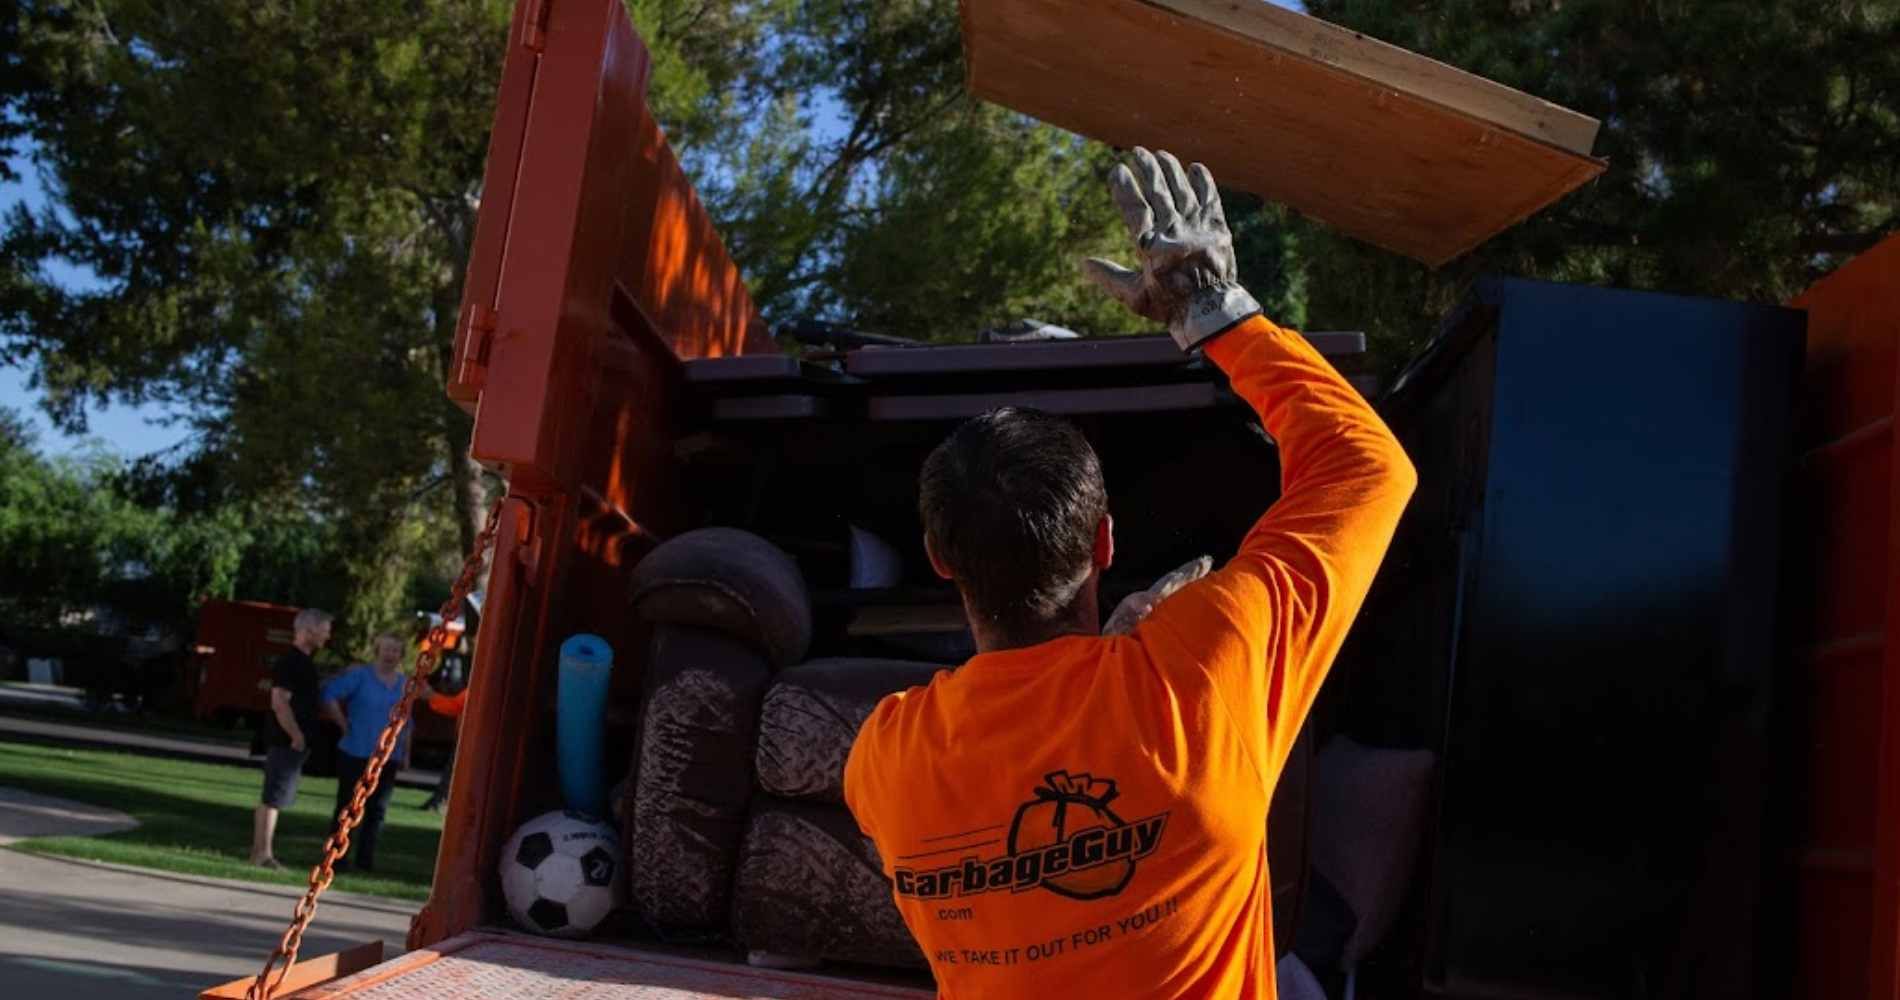 #1 for Eviction Cleanout in Tempe, AZ with Over 1200 5-Star Reviews!